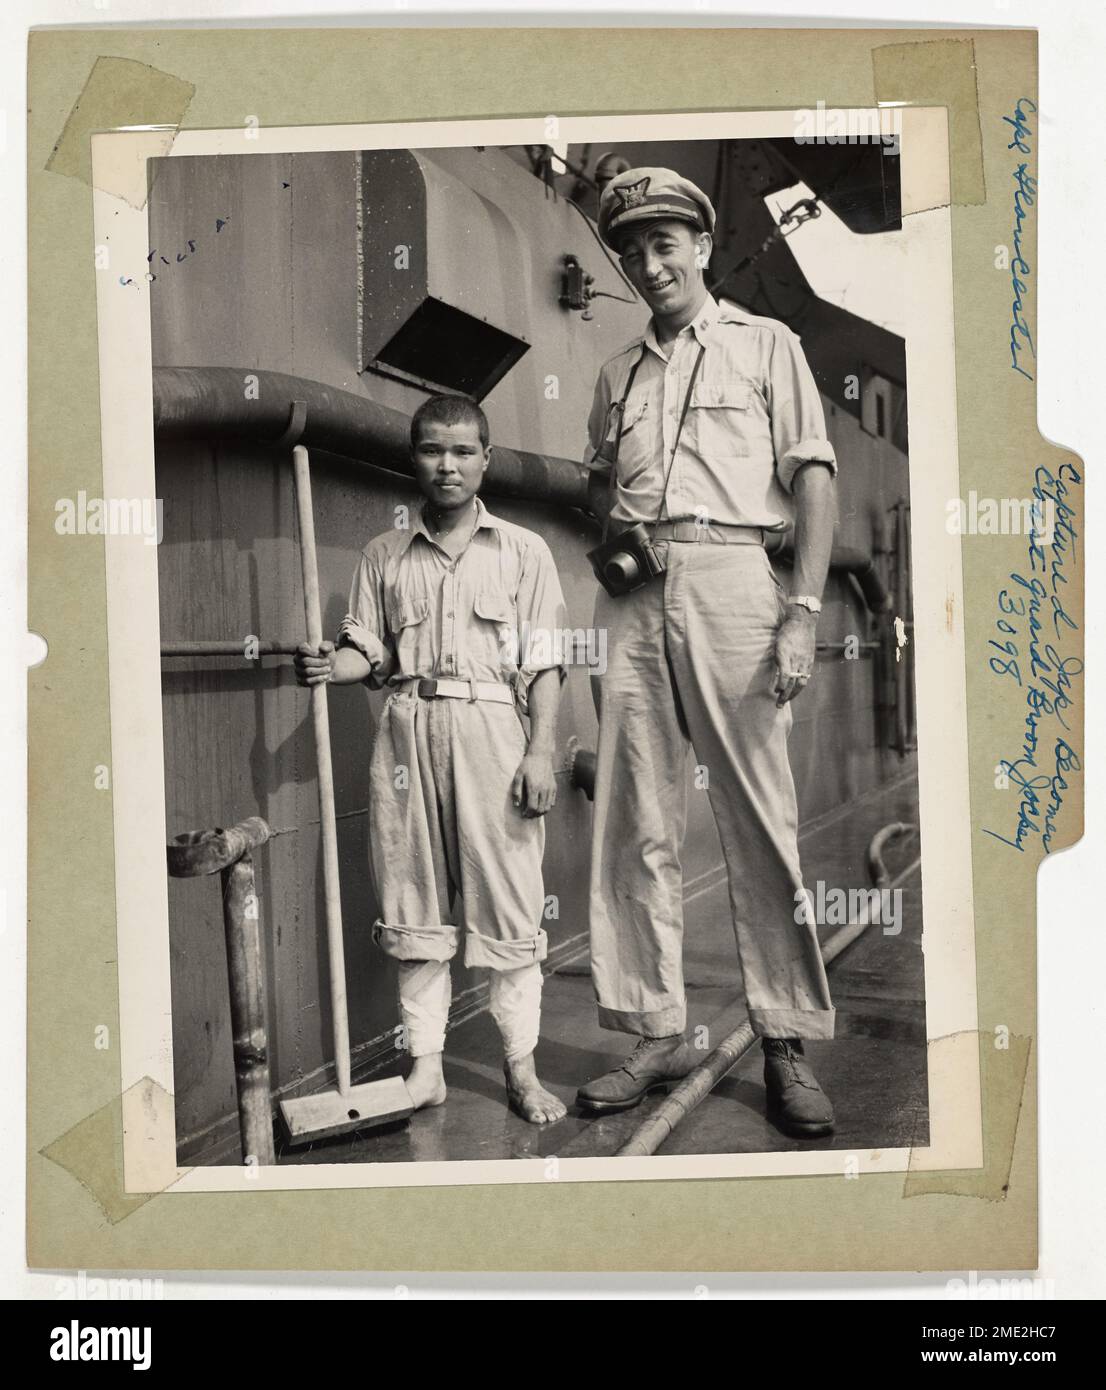 Photograph of Coast Guardsman with Japanese Prisoner of War. Captured Jap Becomes Coast Guard Broom Jockey. Coast Guard Lieut. Robert Edge towers above a captured Jap, who has been assigned to pushing a broom aboard a Coast Guard-manned invasion transport. The Nip is one of those who preferred life to 'immortal death' in the service of his Emperor, and became a prisoner of war in the Cape Gloucester, New Britain, invasion. Lieut. Edge's home is at 235 East 22nd Street, New York City. Stock Photo